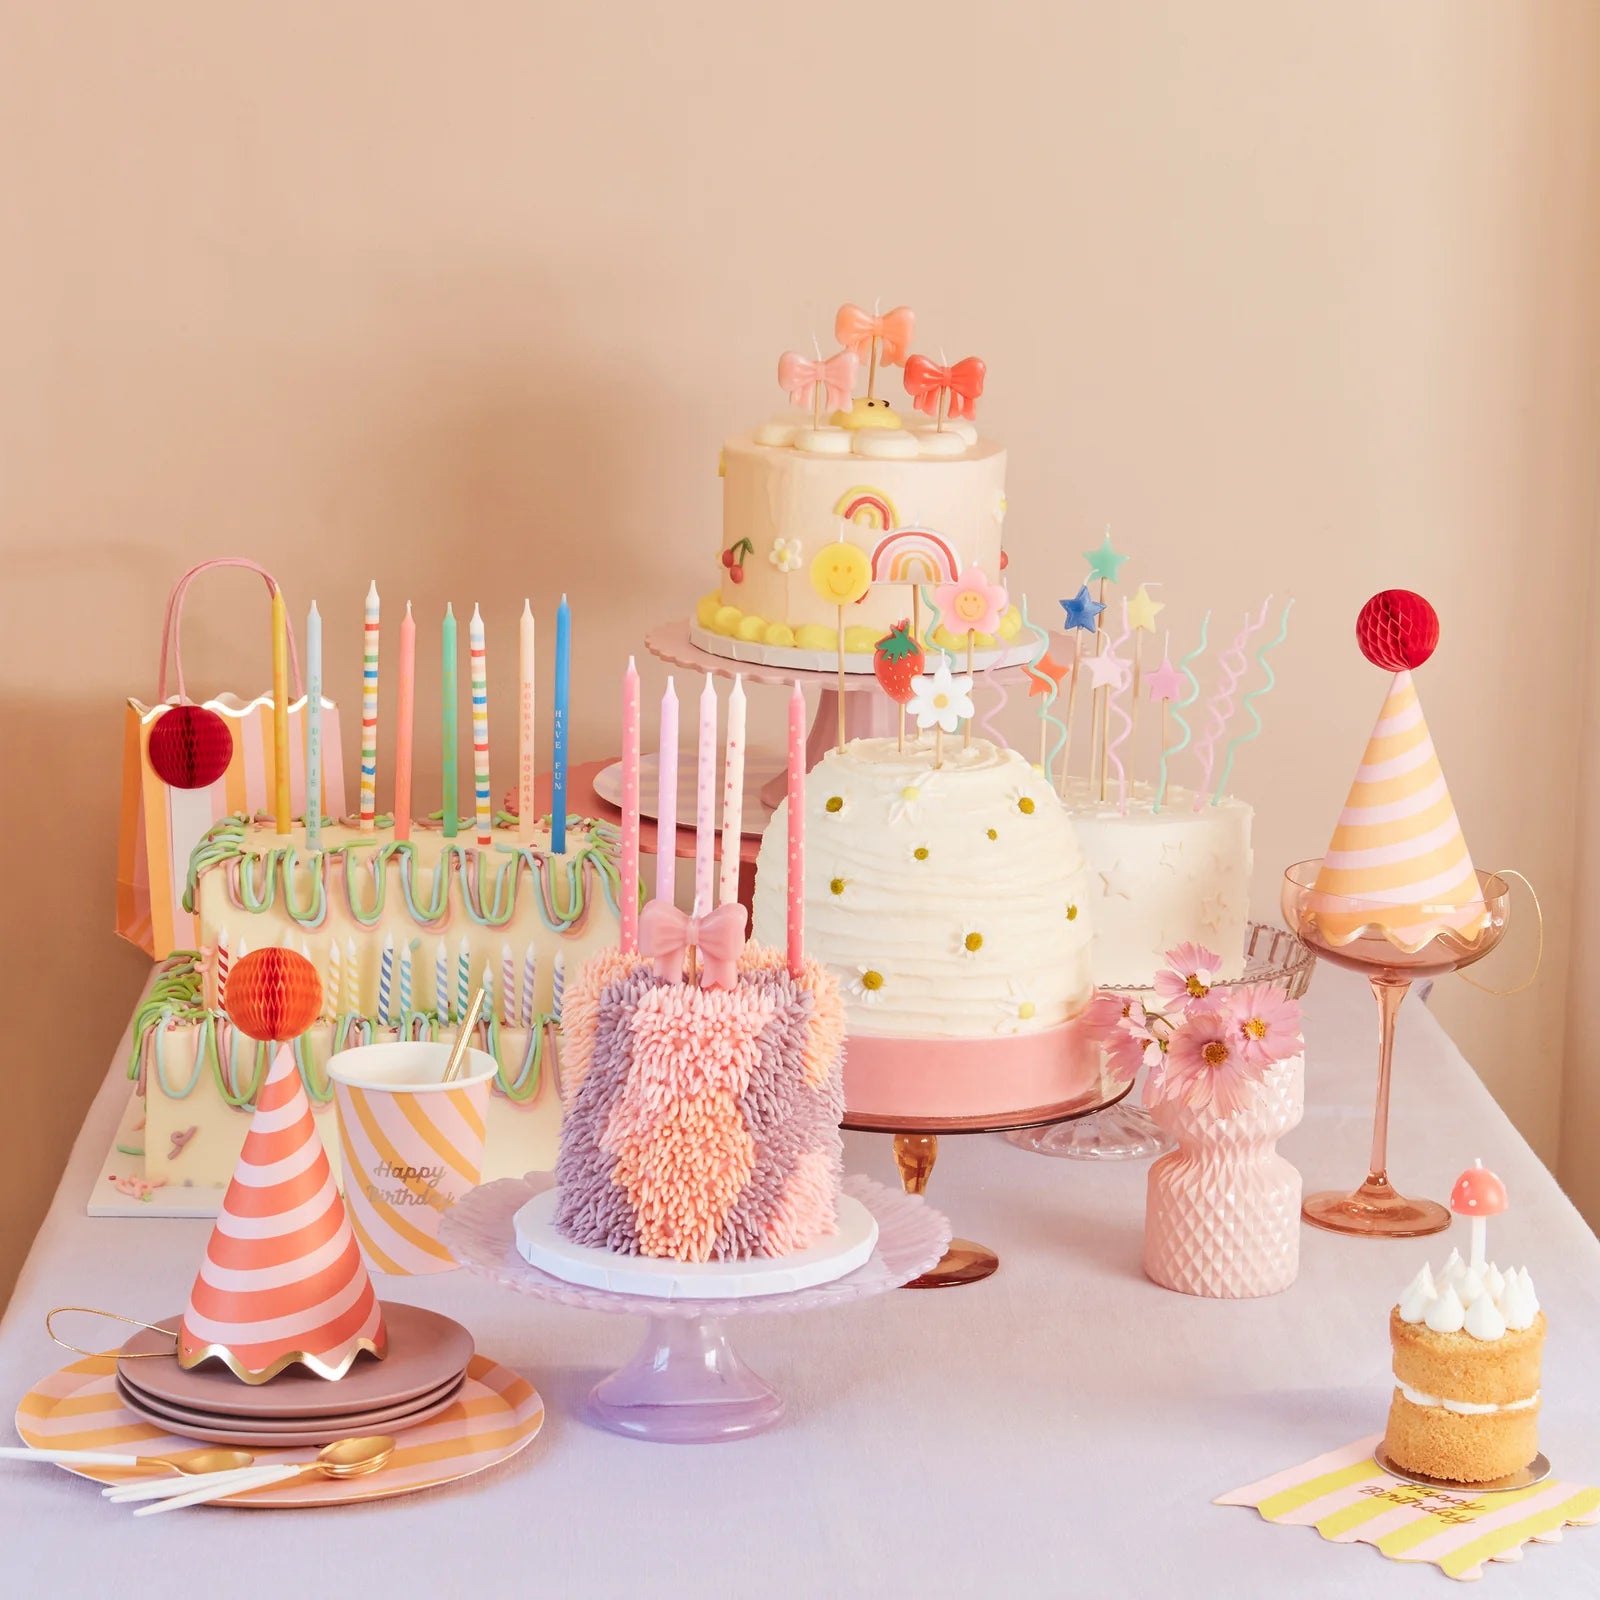 PINK BOW SHAPED CAKE CANDLES